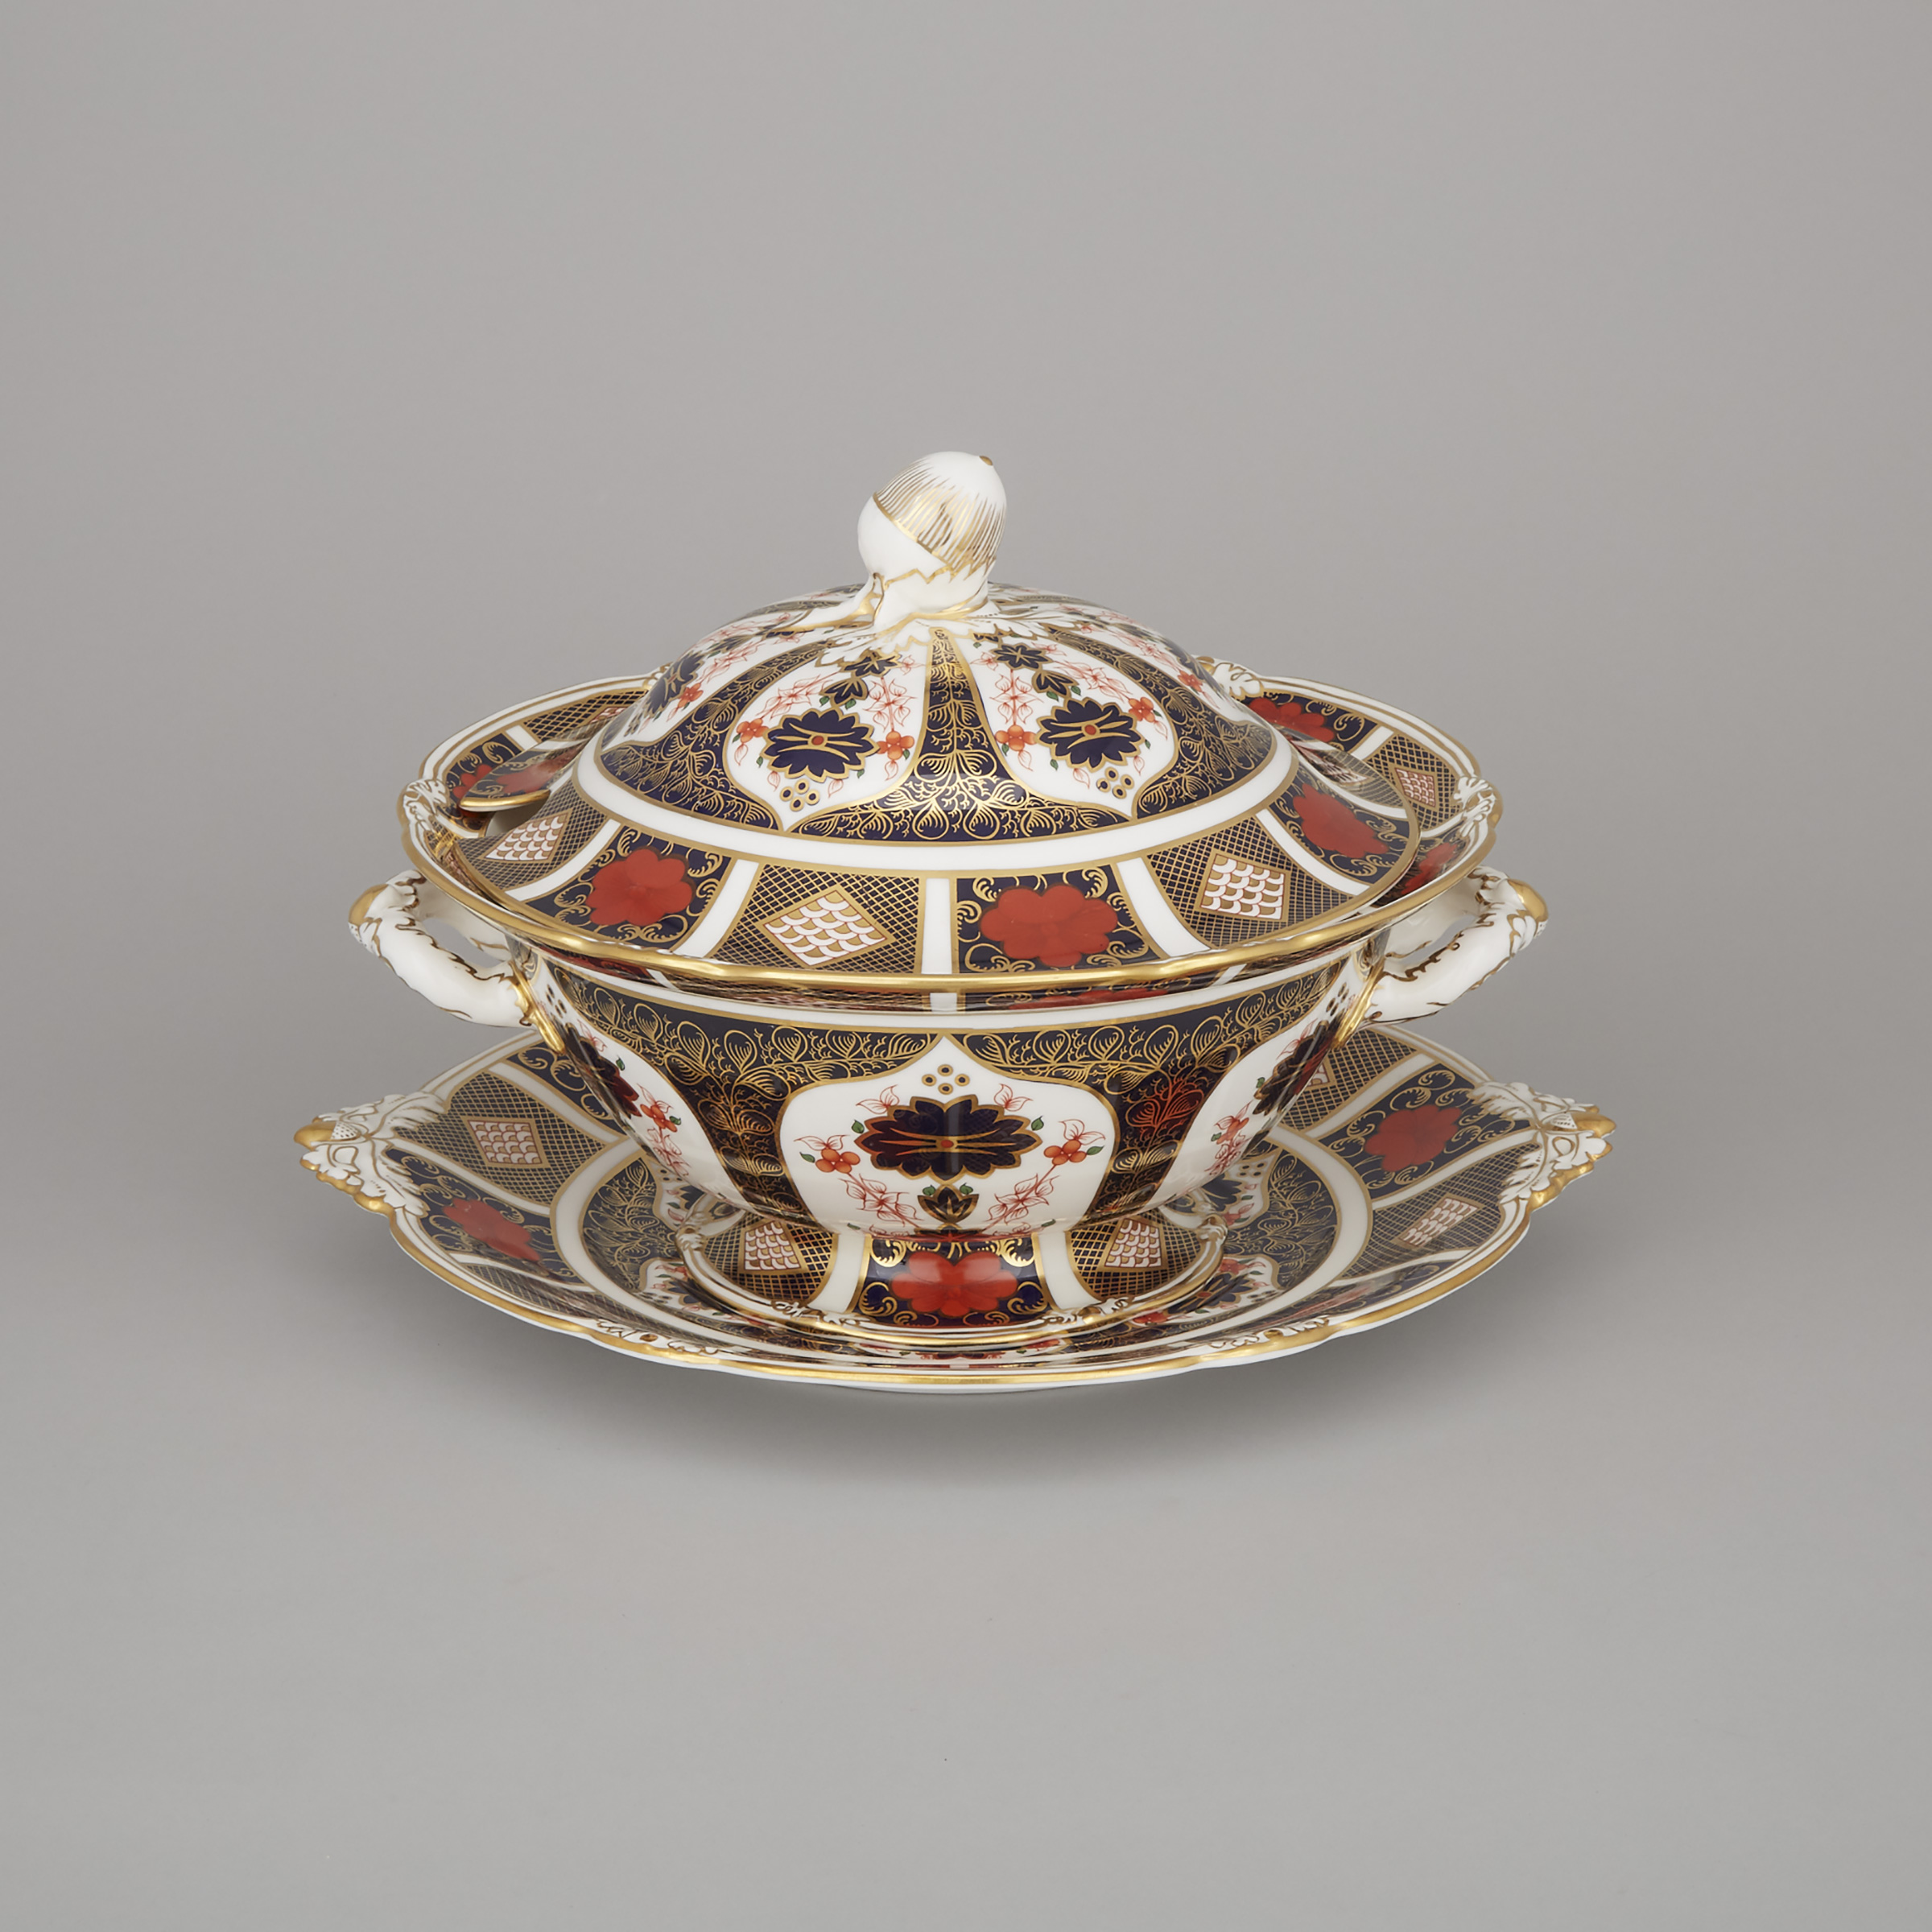 Royal Crown Derby 'Imari' (1128) Pattern Soup Tureen on Stand, 1978/79